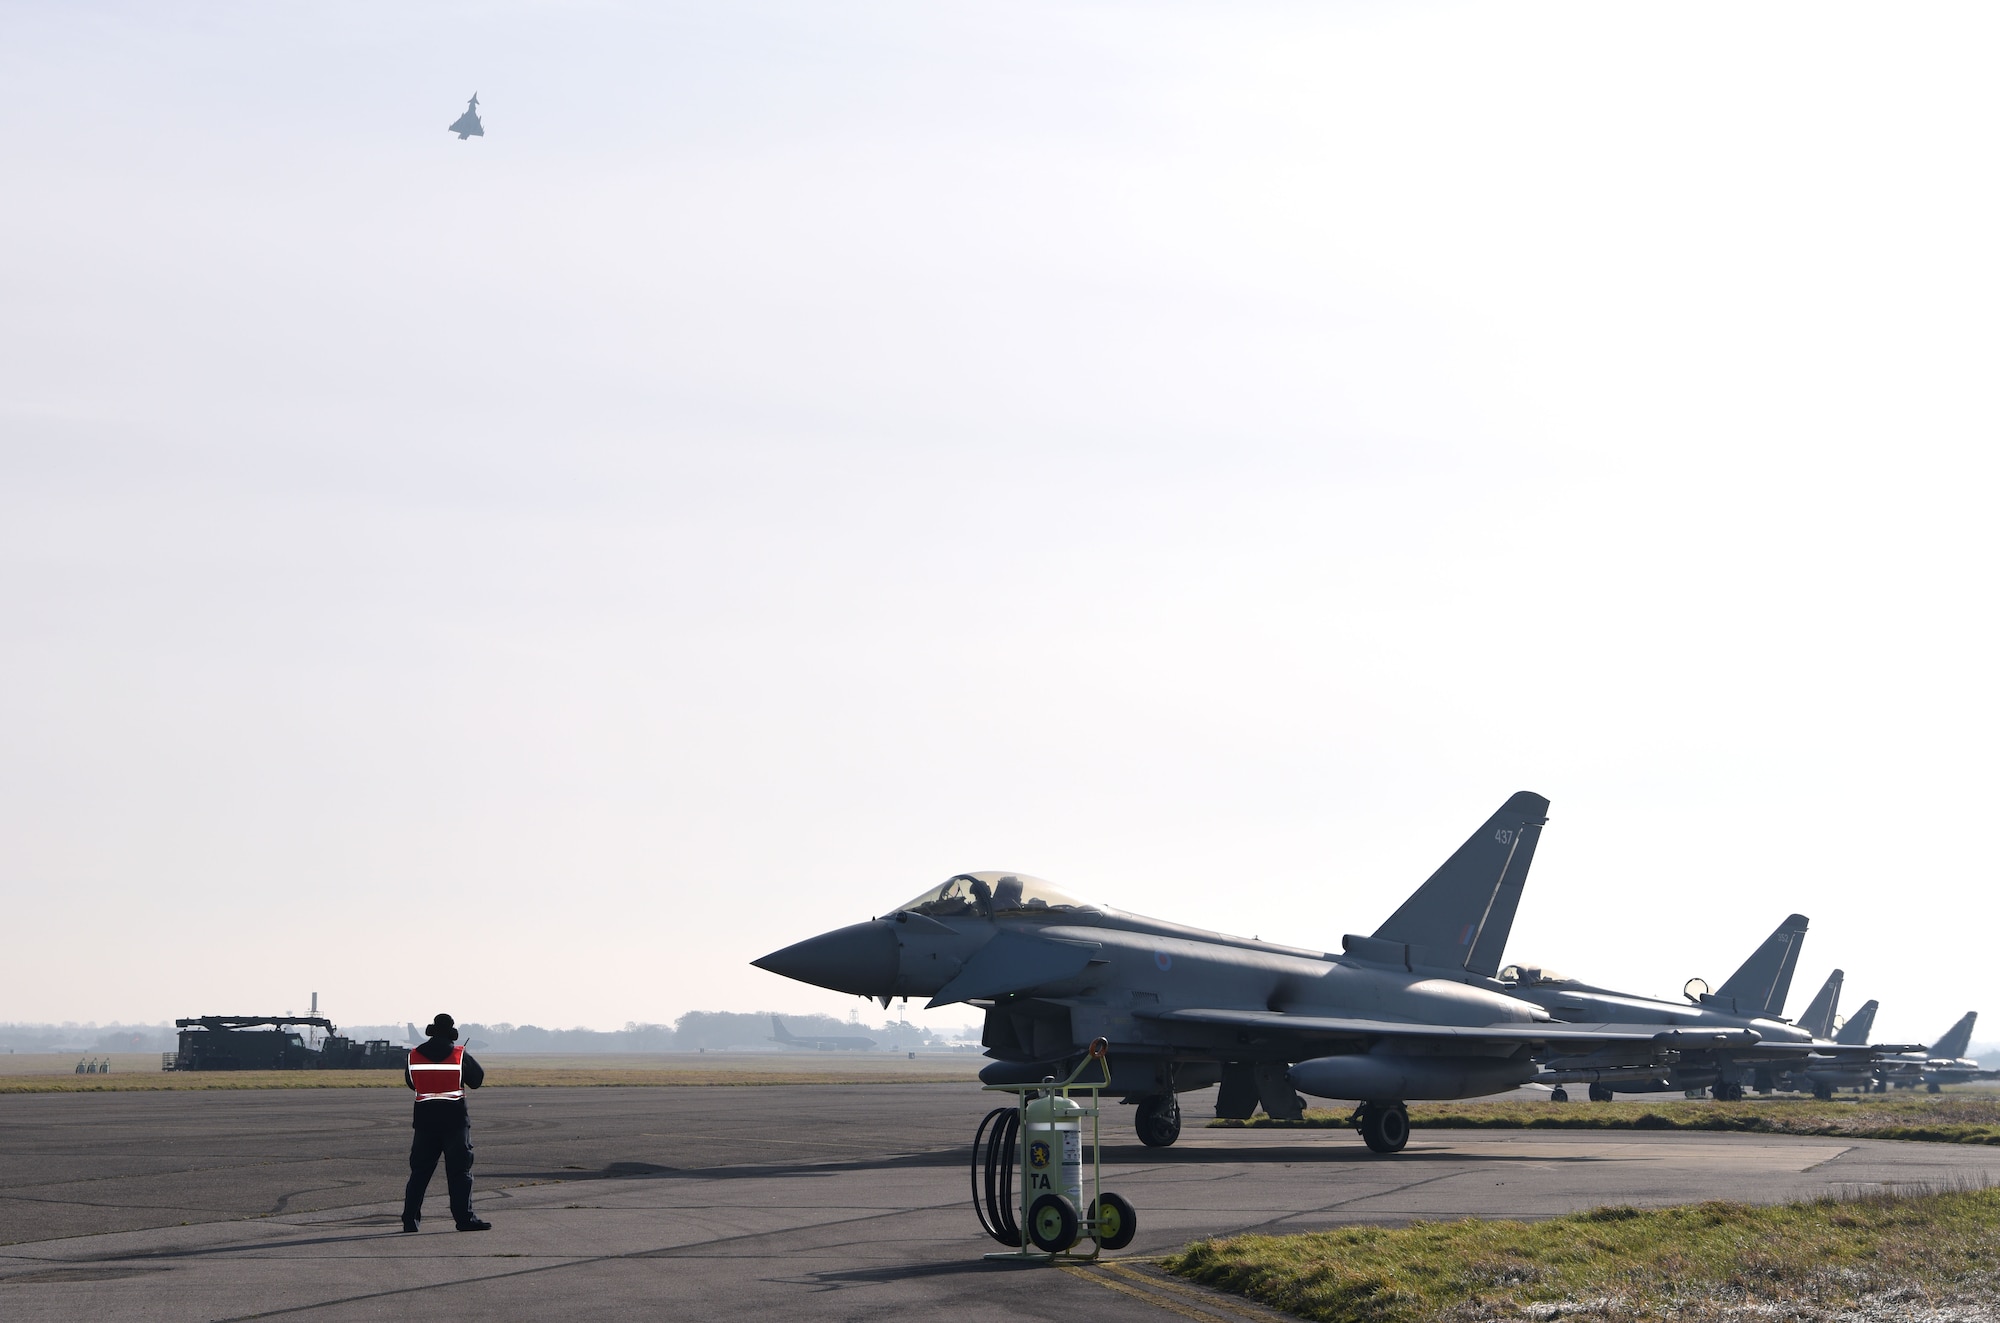 A Team Mildenhall member from transient alert prepares to marshal out Royal Air Force Eurofighter Typhoons at Royal Air Force Mildenhall, England, Feb. 15, 2023. The aircraft, from RAF Coningsby, England, diverted here due to bad weather. The Typhoon is a highly capable and extremely agile multi-role combat aircraft, and the pilot performs many essential functions through the aircraft’s hands on throttle and stick interface which – combined with an advanced cockpit and the helmet equipment assembly – renders the Typhoon superbly equipped for all aspects of air operations. (U.S. Air Force photo by Karen Abeyasekere)